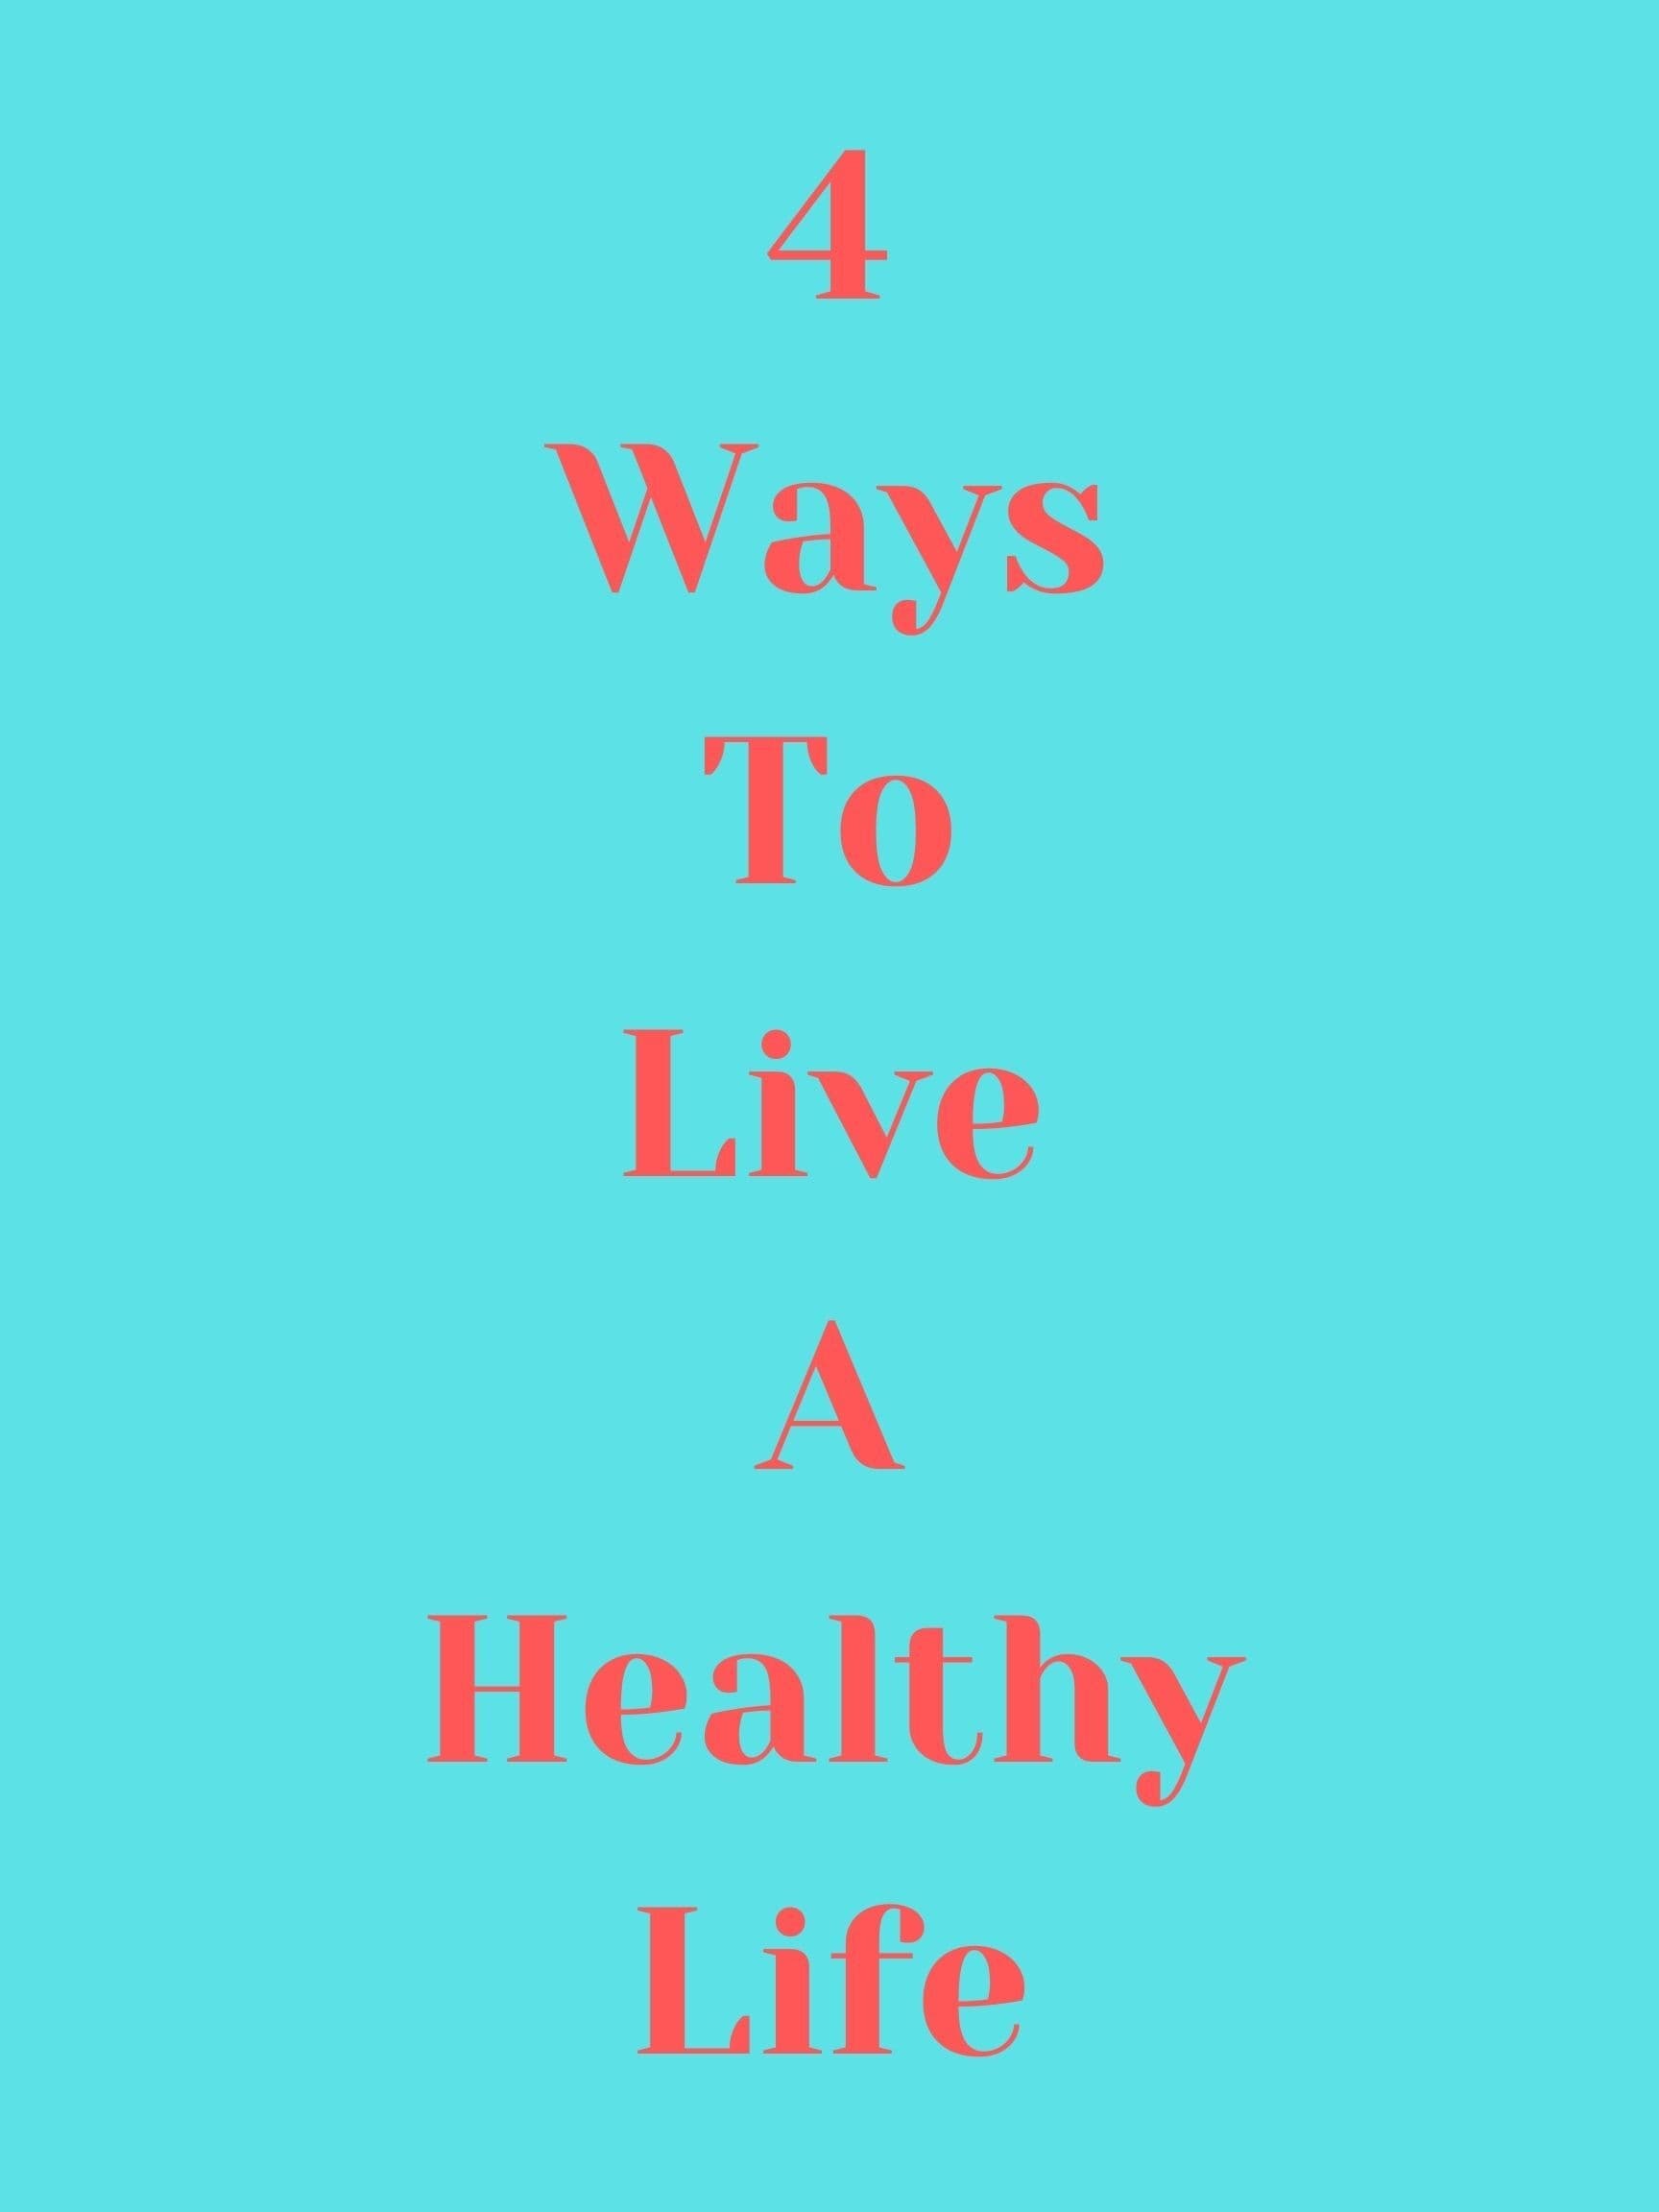 4 Ways to Live a Healthy Life